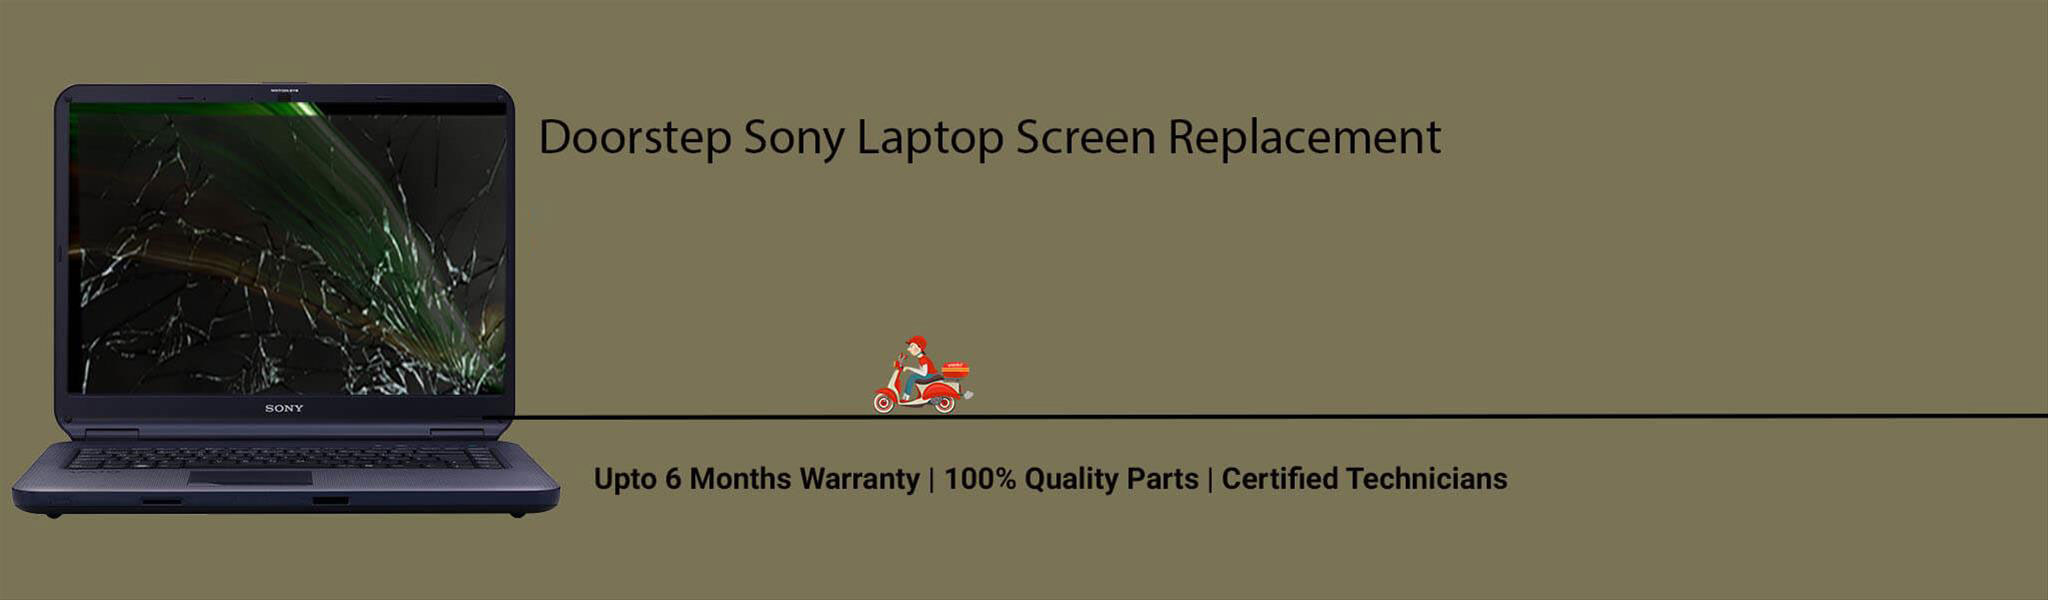 sony-laptop-screen-replacement.jpg